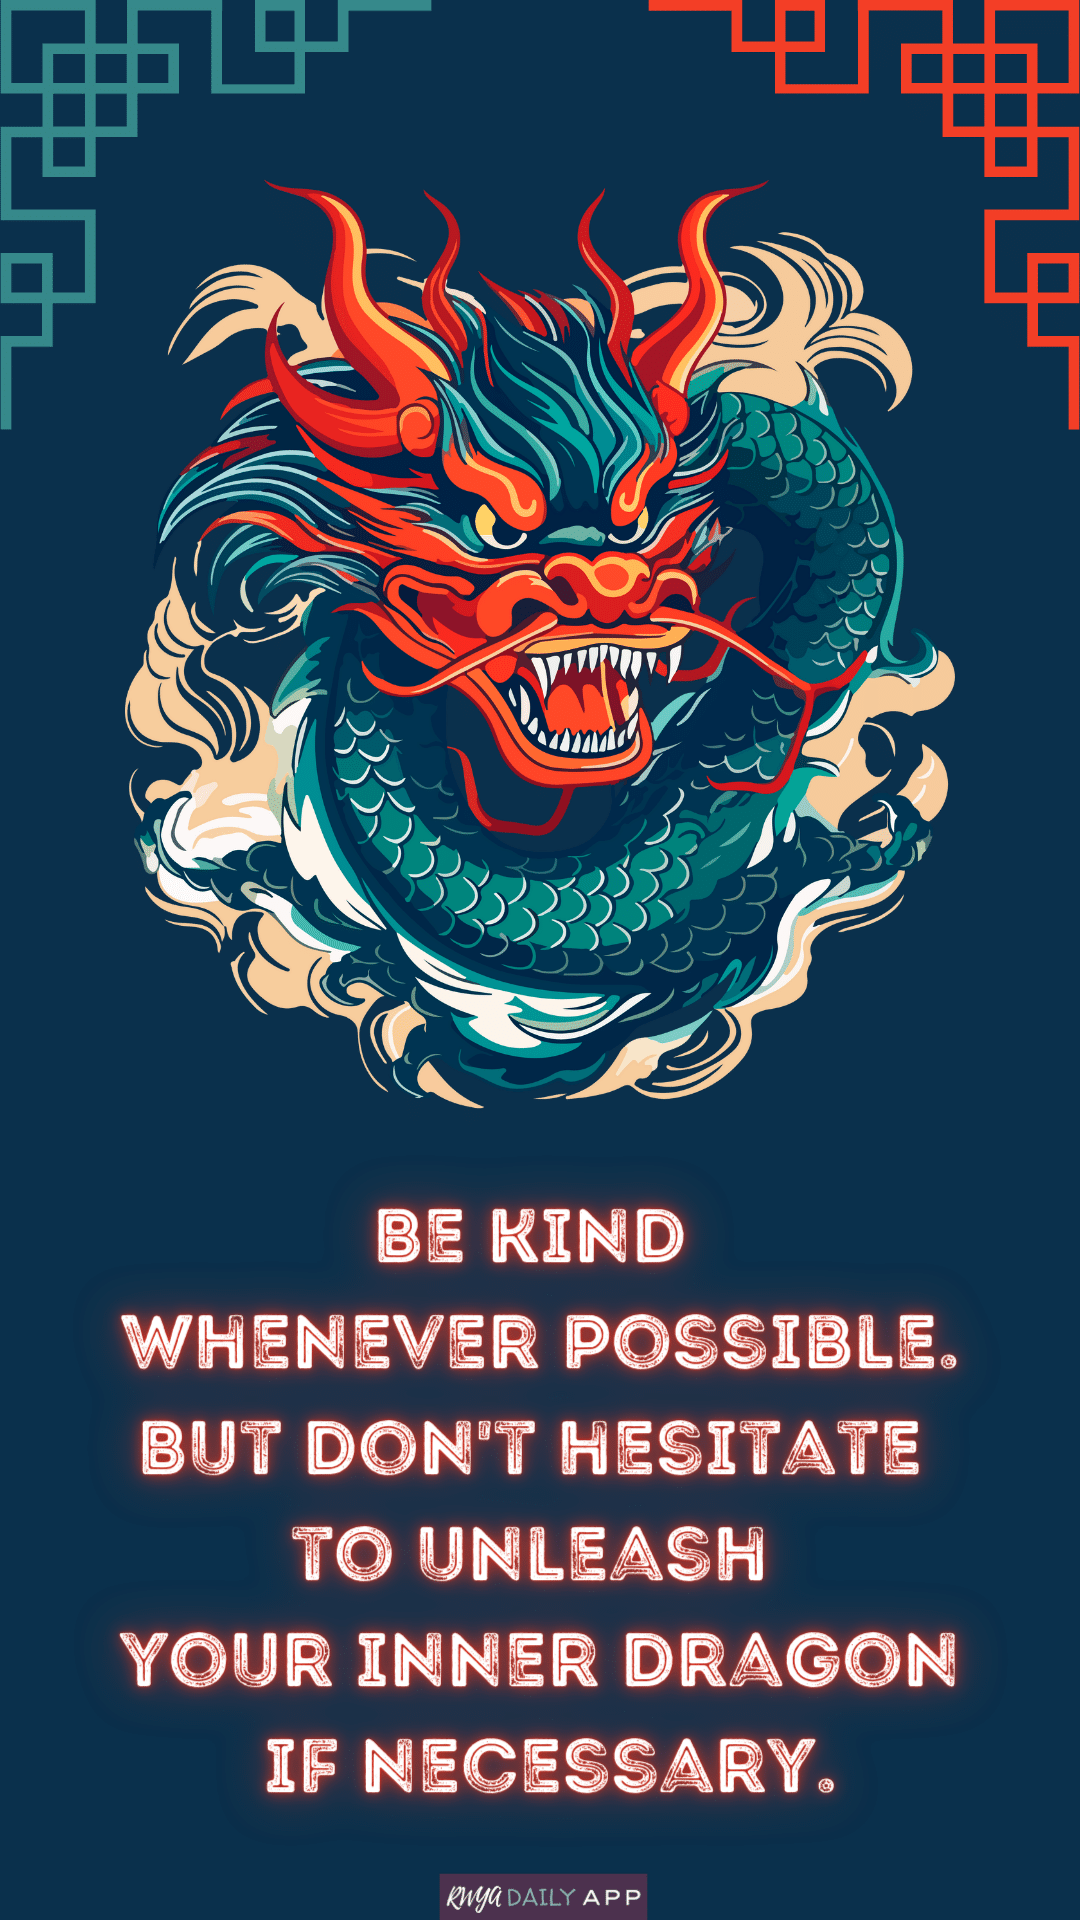 Be kind whenever possible. But don't hesitate to unleash your inner dragon if necessary. 